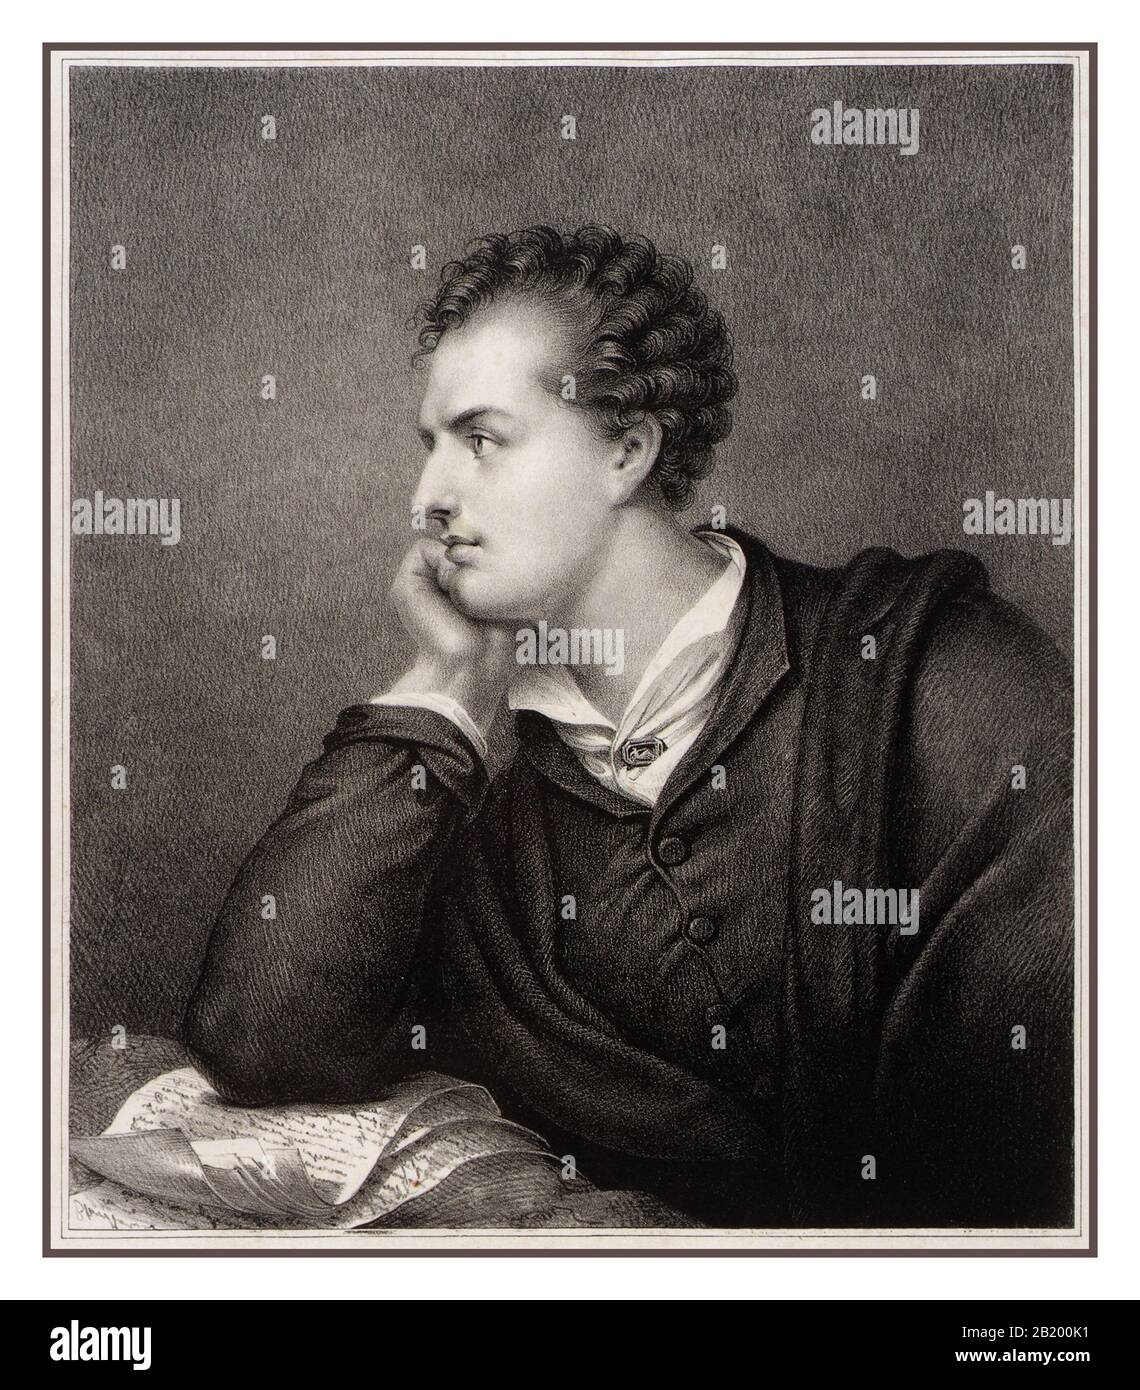 BYRON Archive lithograph etching c1885 Lord Byron. George Gordon Byron, 6th Baron Byron, known simply as Lord Byron. He was a renowned English poet and a leading figure in the 1800’s Romantic movement. Among his best-known works are the narrative poems Childe Harold's Pilgrimage and Don Juan. Lord Byron is also famous for the way he lived his life. He was a dandy, living extravagantly, with many love affairs and debts. Stock Photo